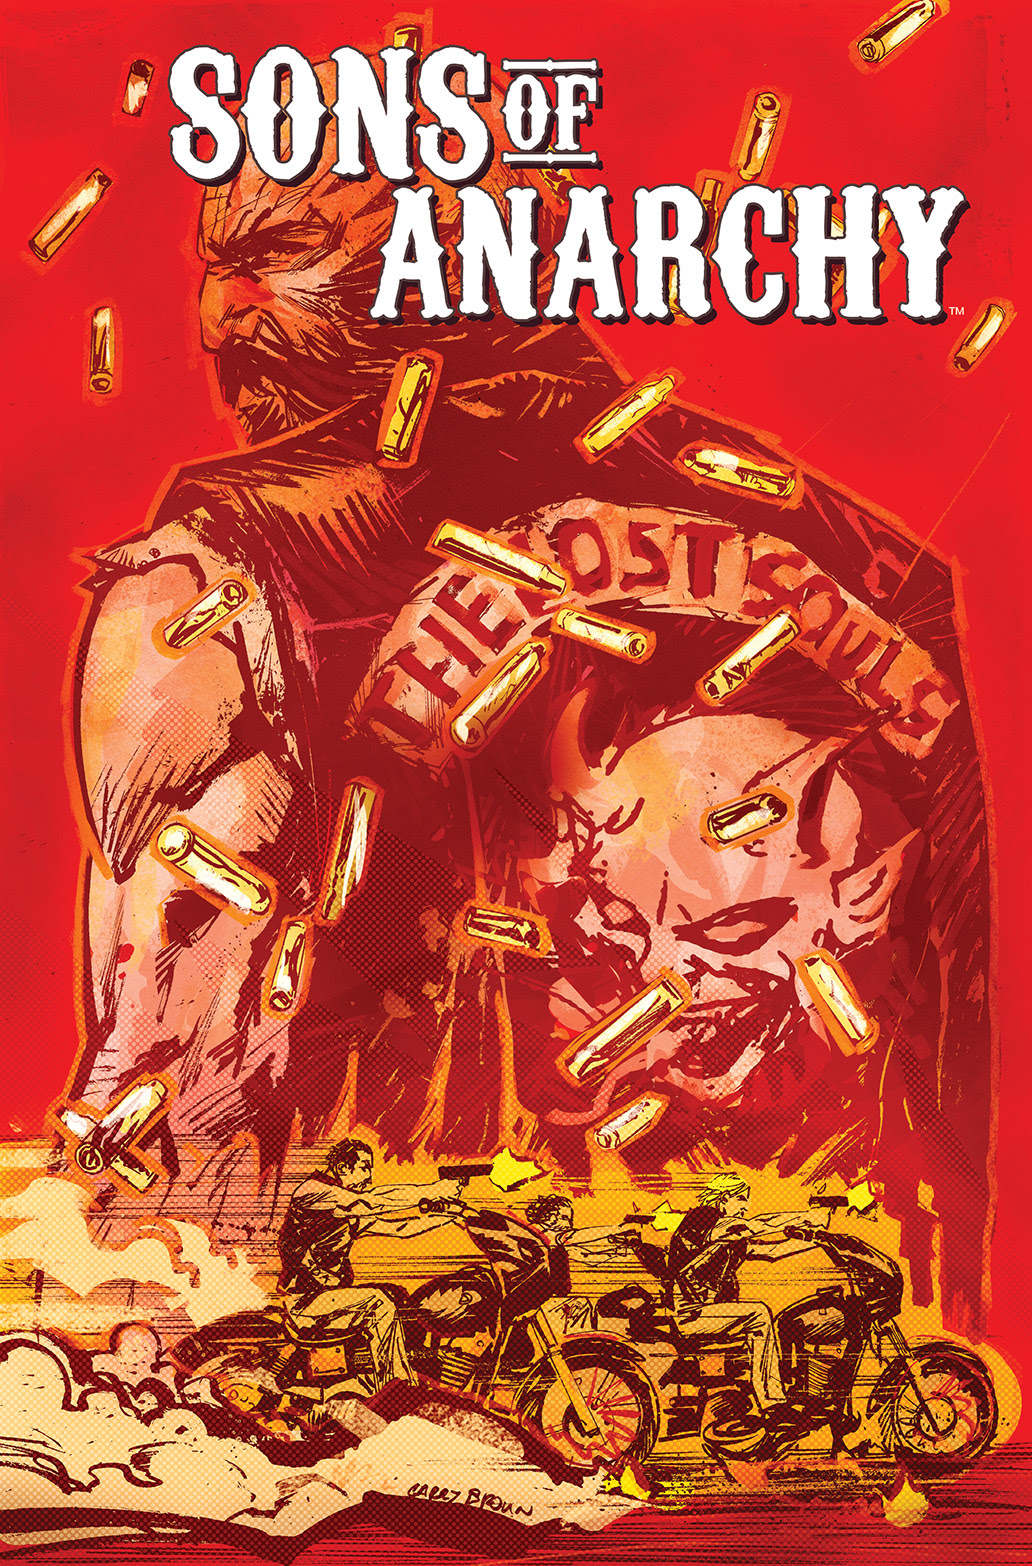 SONS OF ANARCHY #13 Cover by Garry Brown